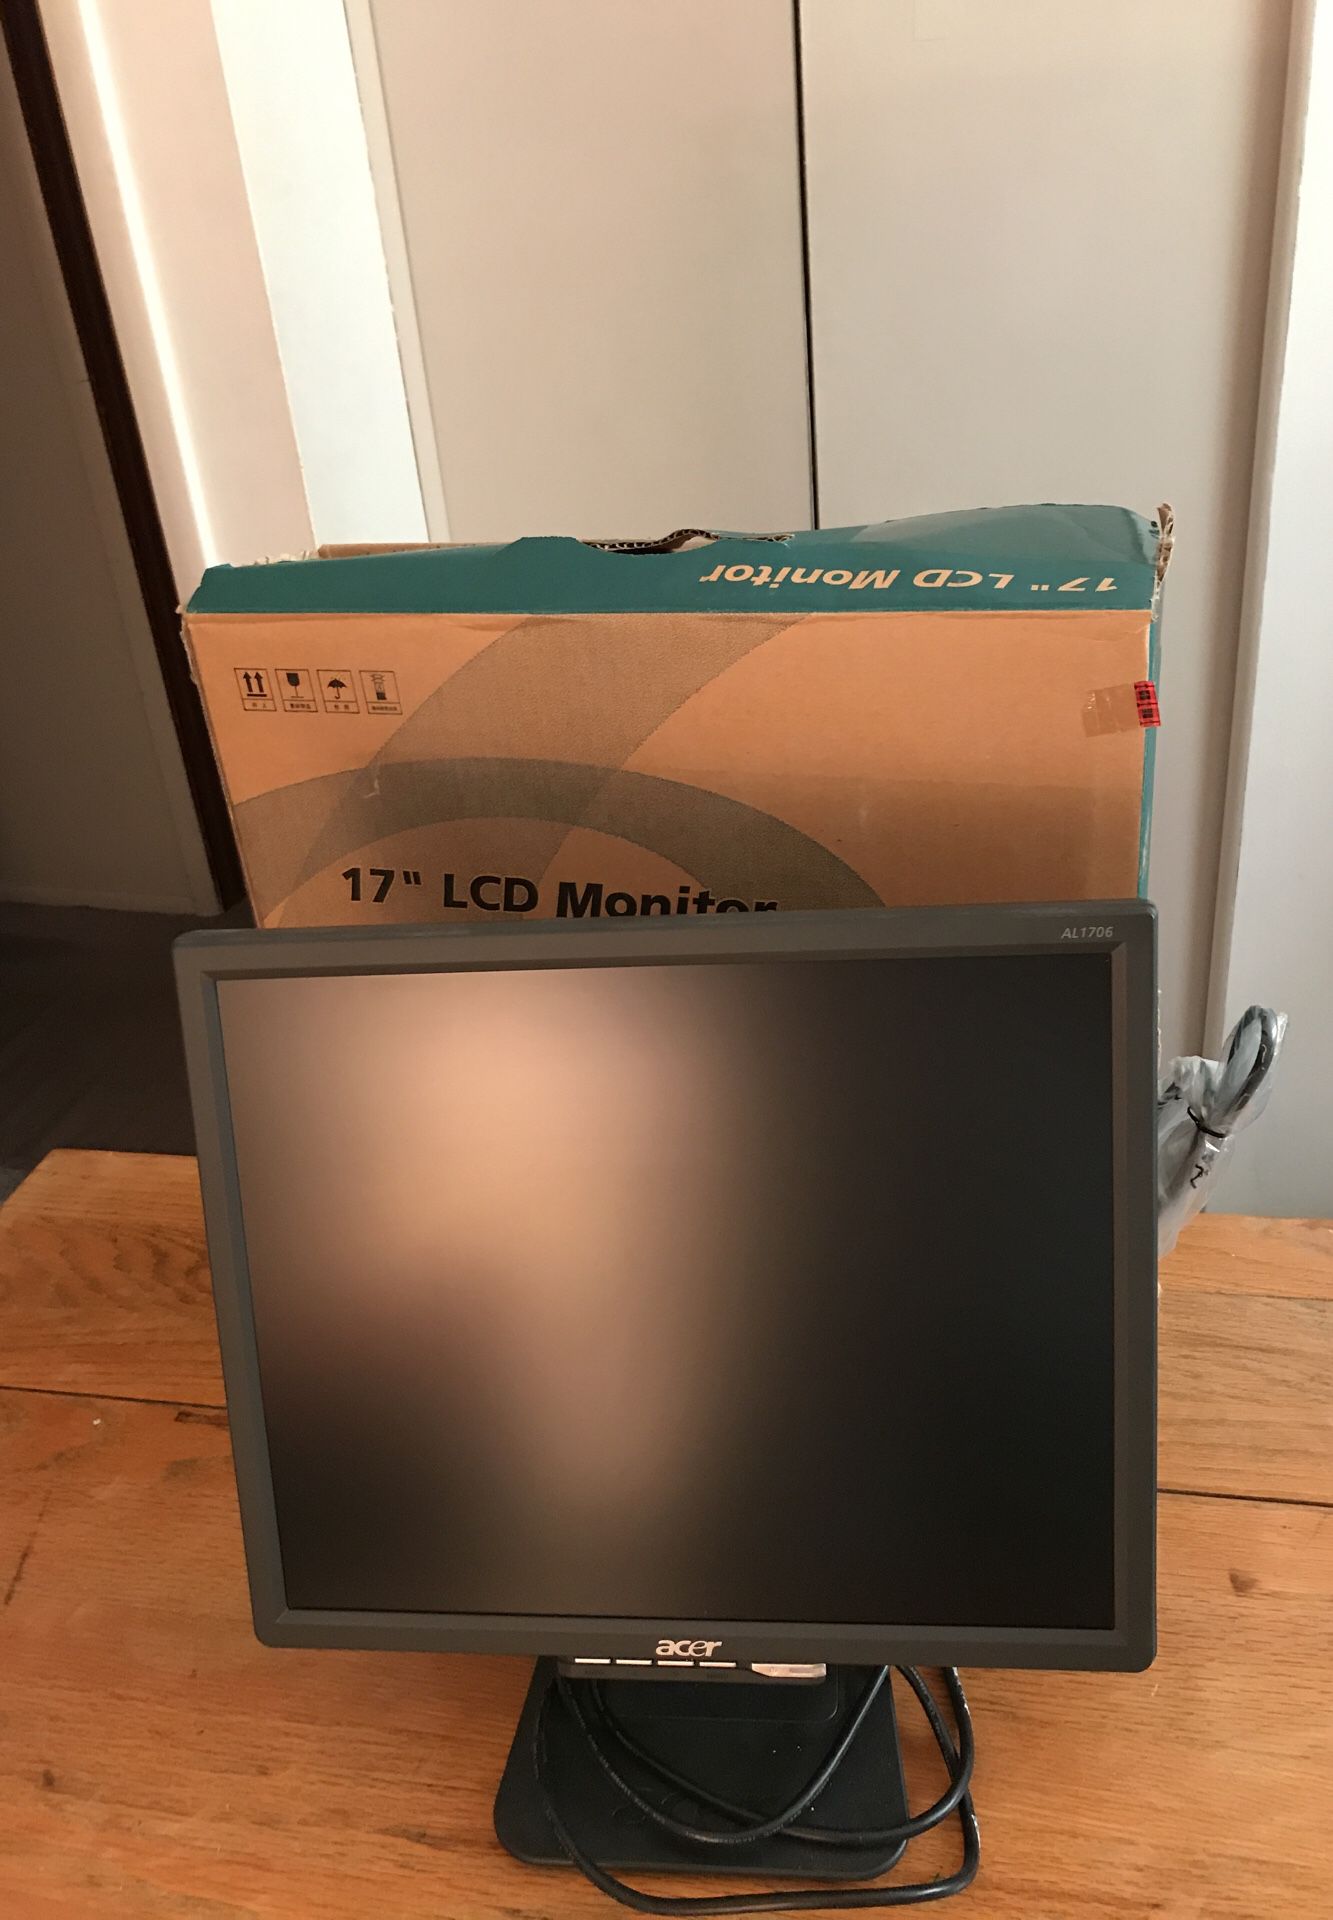 Computer monitor 17 inches with box - see pictures.